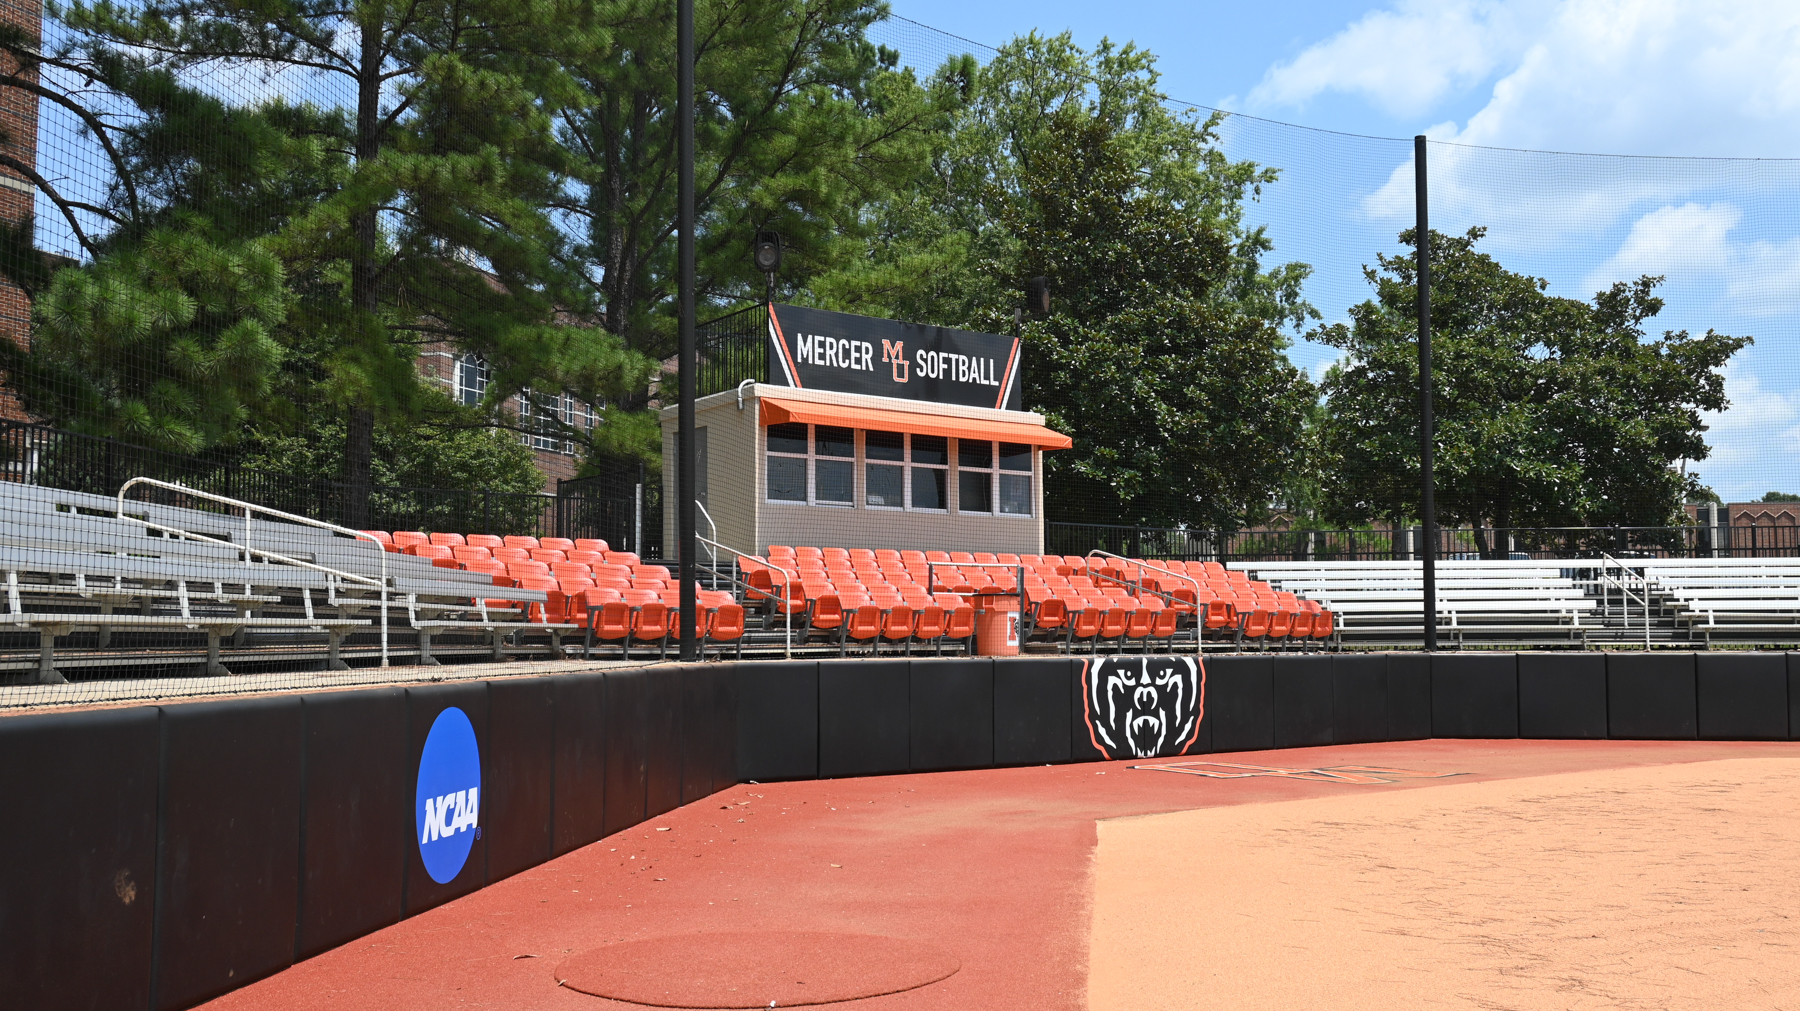 view of stands from diamond. sign says mercer softball